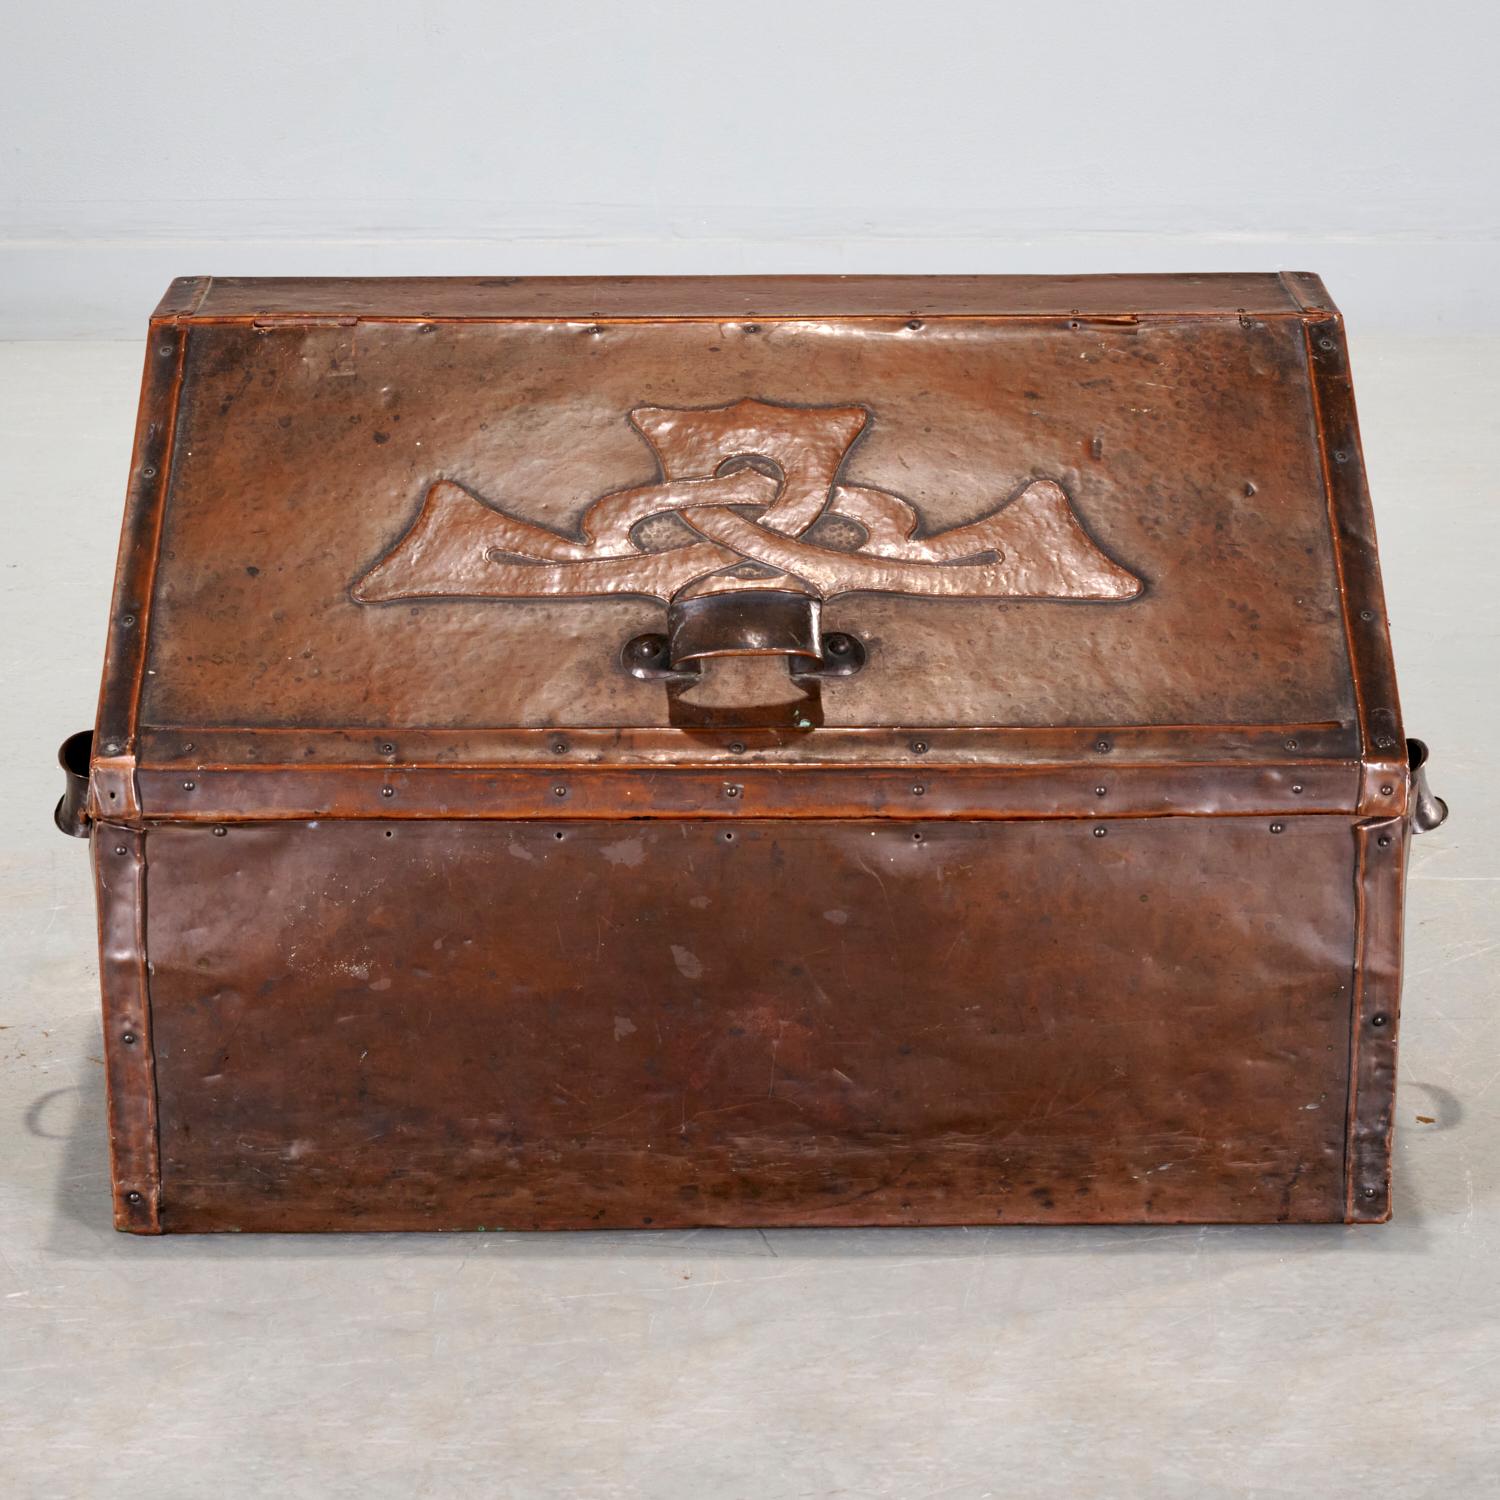 Early 20th c., England, a hammered and repousse decorated copper sheet metal over wood box, the hinged slated lid decorated with in Arts & Crafts style. 

A wonderful Liberty & Co. Arts & Crafts (attributed) copper log box, dating to circa